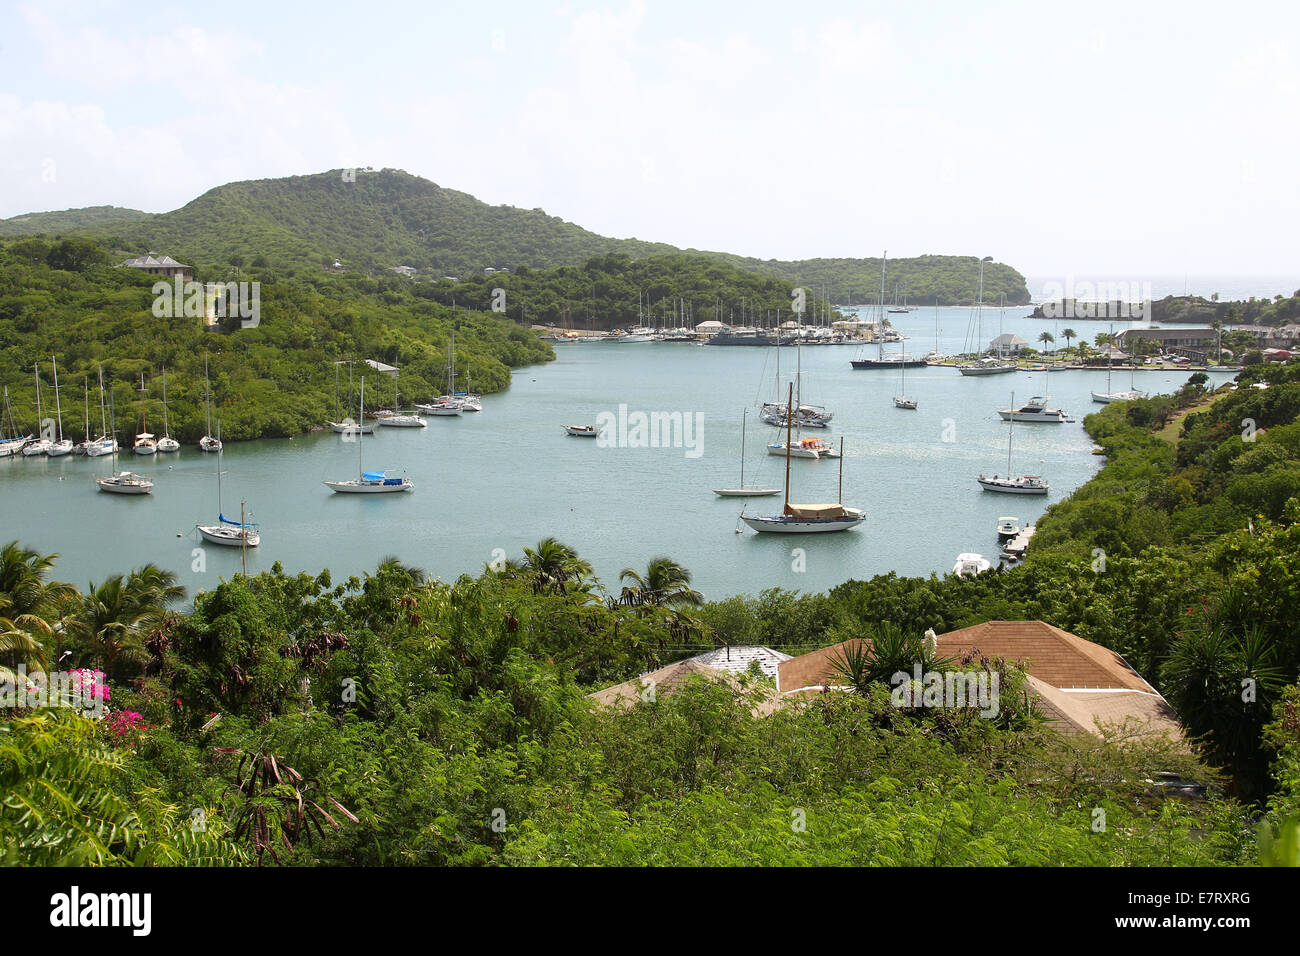 Boats in a bay in a Caribbean  Island Stock Photo